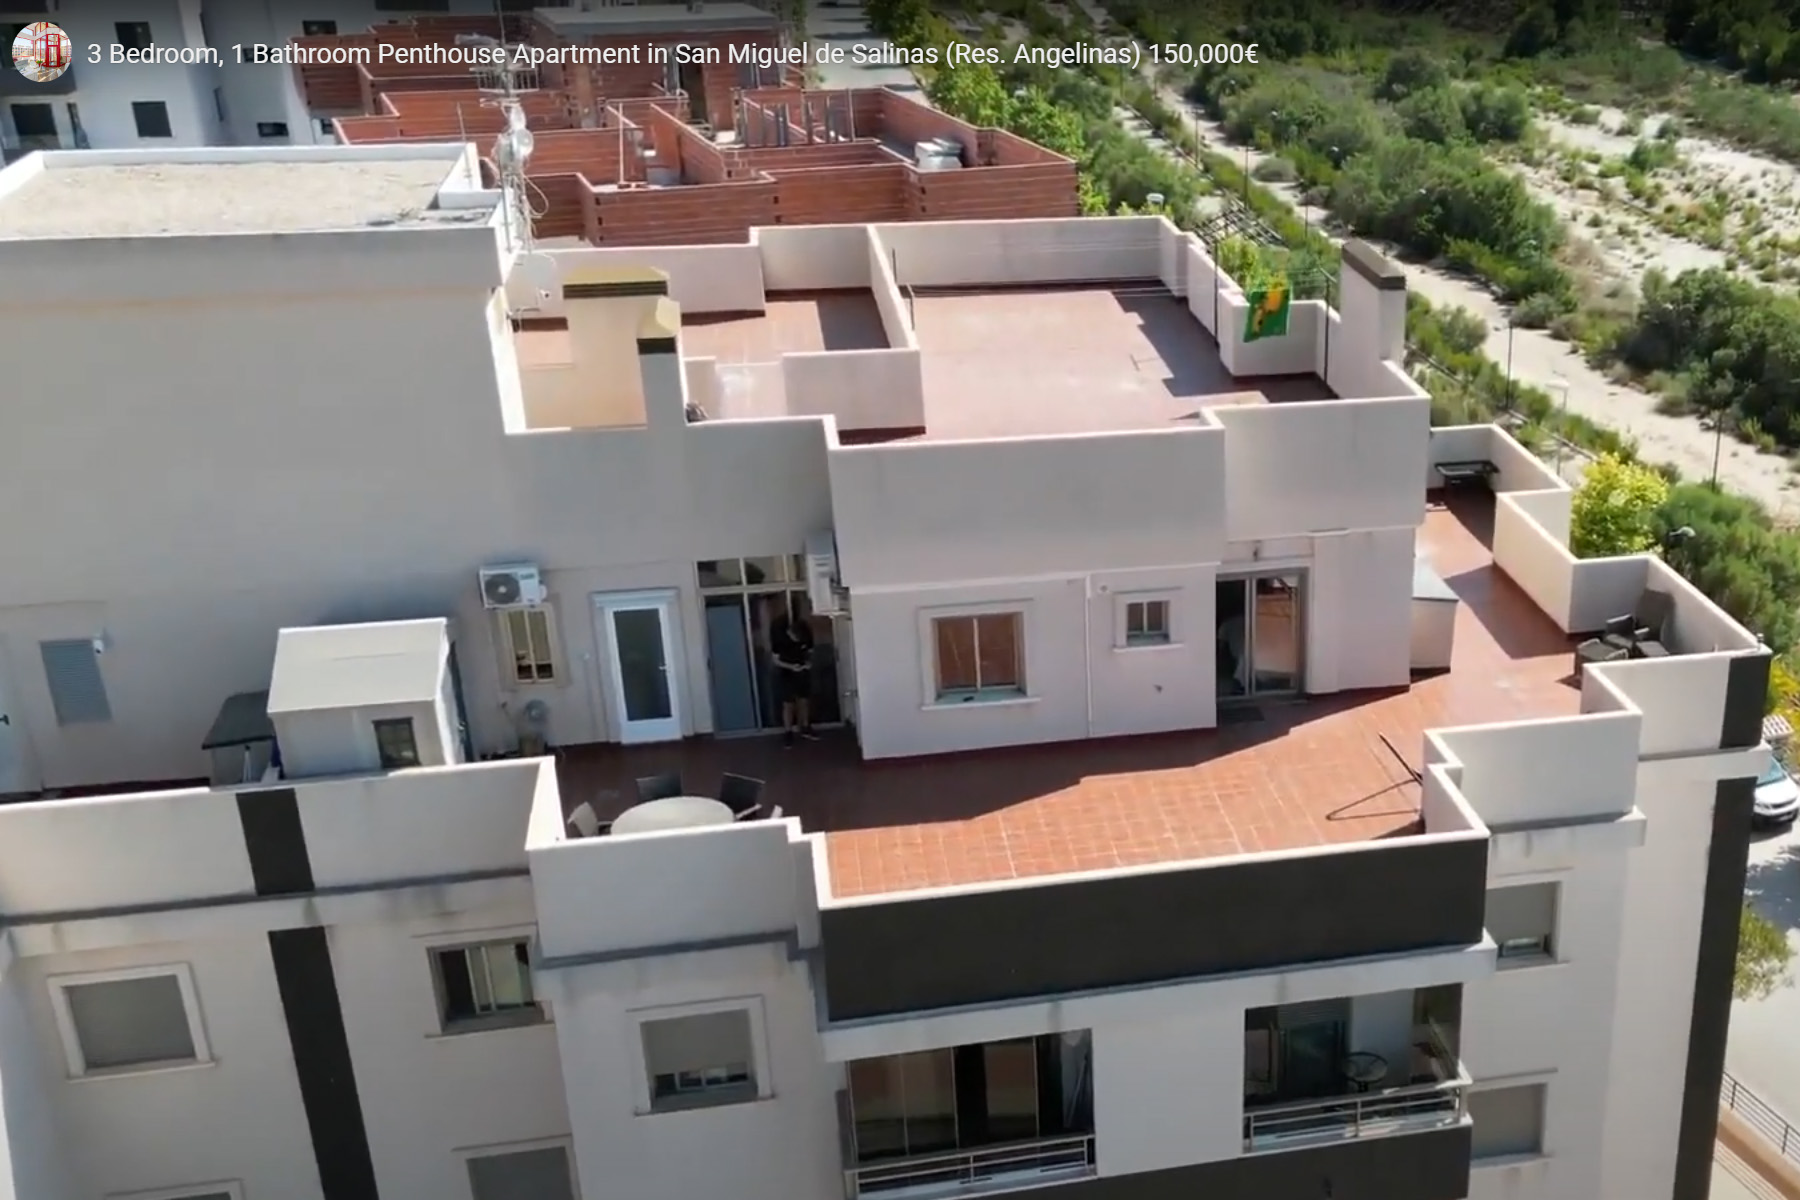 San Miguel de Salinas penthouse apartment Res. Angelina with amazing views and garage space